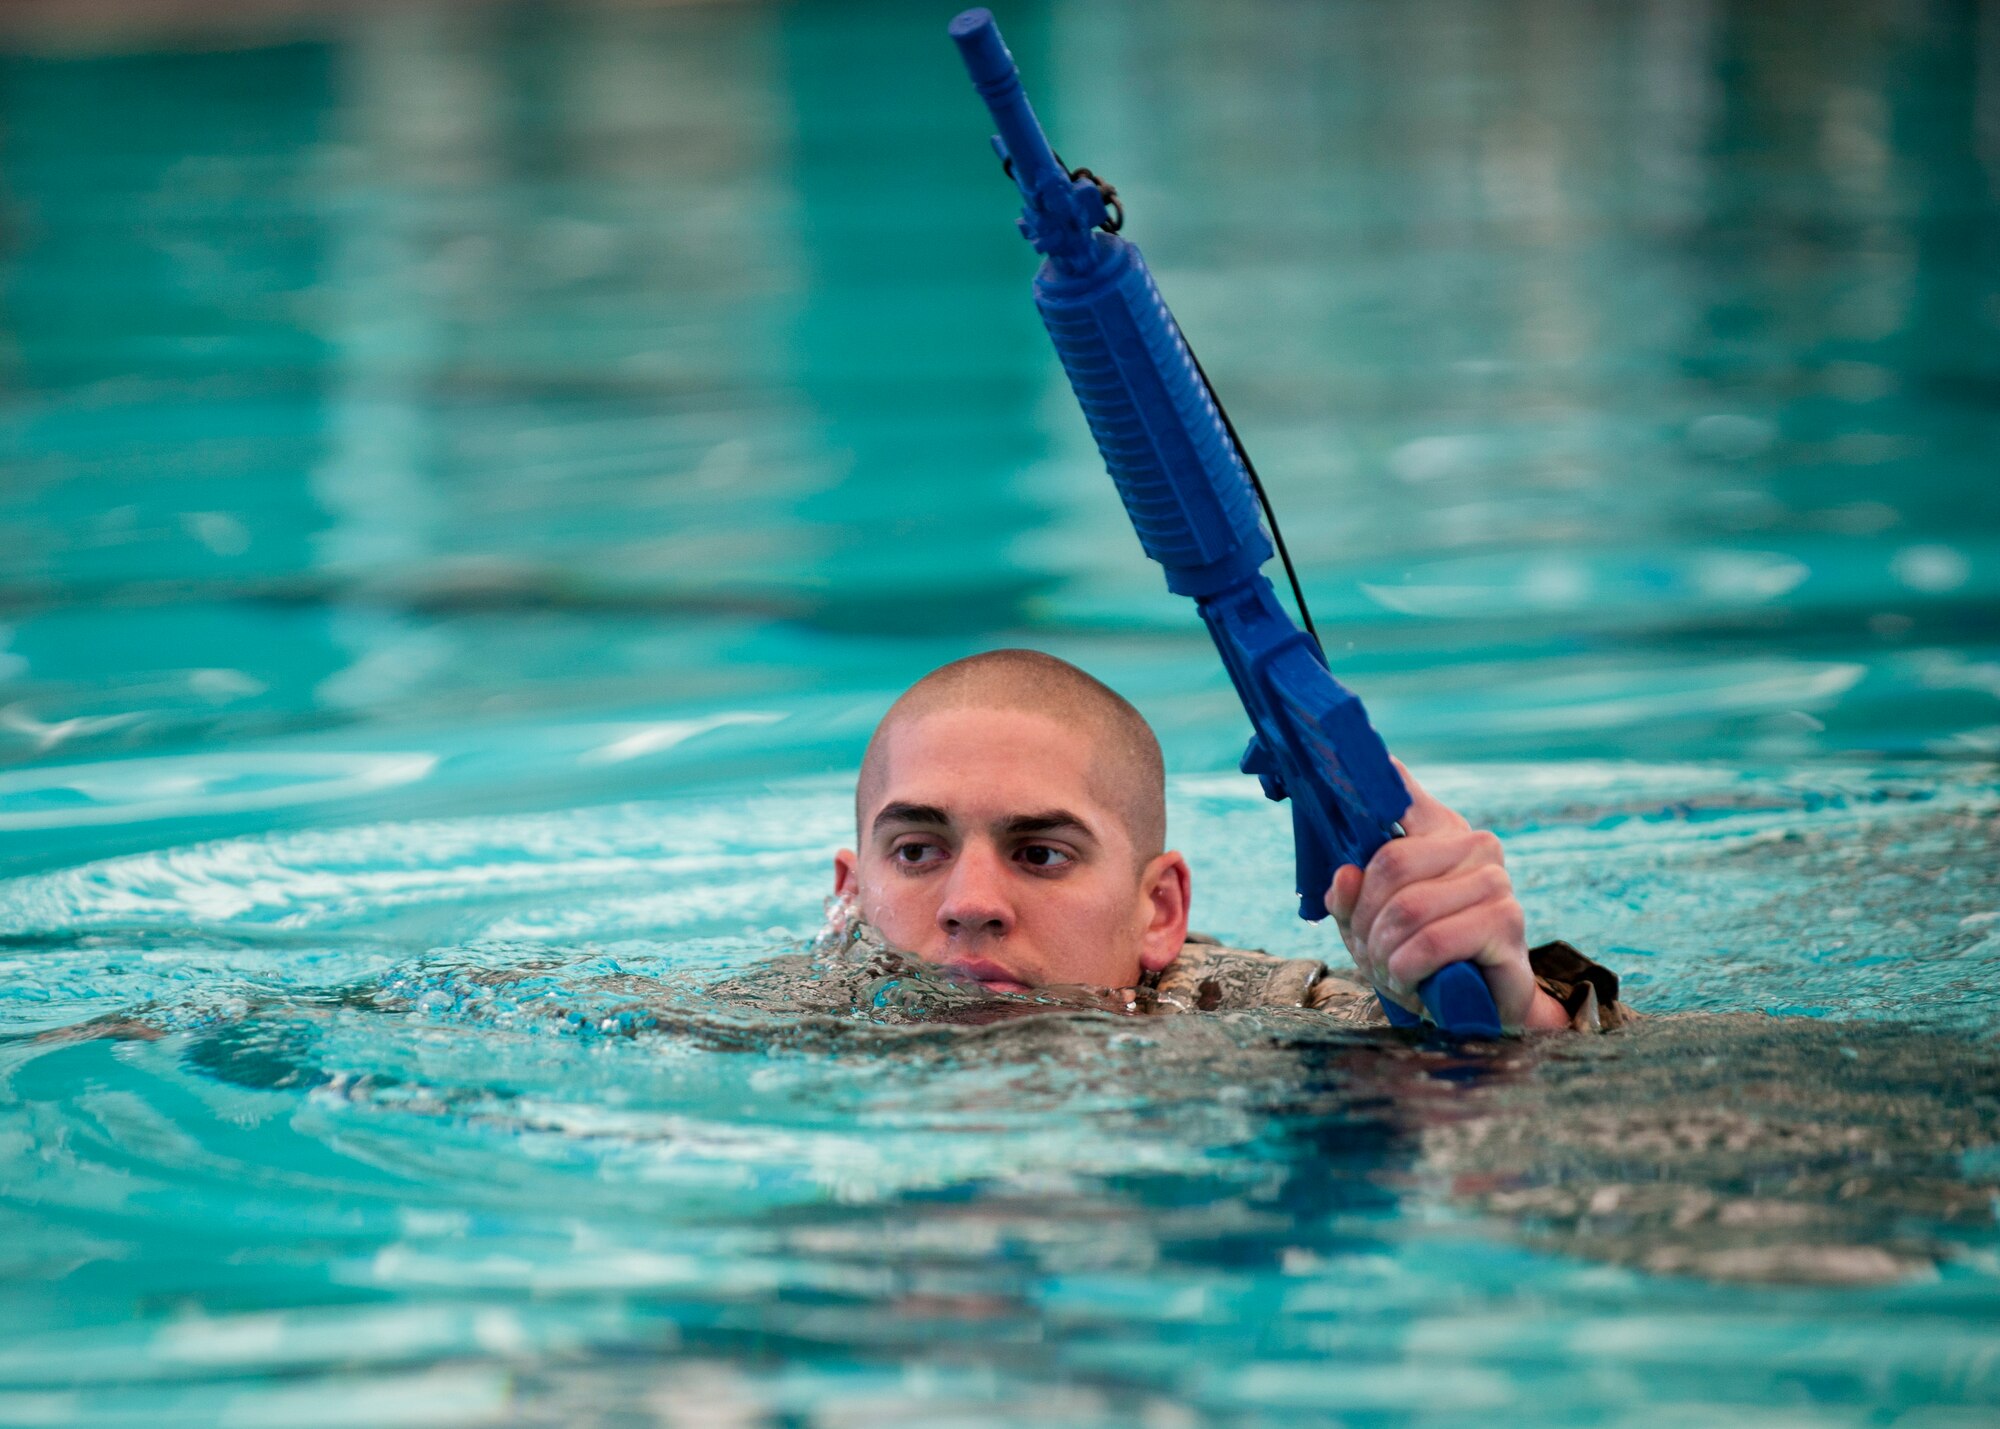 A Ranger Assessment Course student completes the water survival portion of the course at the Municipal Pool, Las Vegas, Oct. 2, 2014. During this portion of the test, students are required to keep their head and weapon above the surface of the water. The two-week course is stress-oriented and develops the student’s ability to lead and command under heavy mental, emotional and physical stress. (U.S. Air Force photo by Airman 1st Class Thomas Spangler)